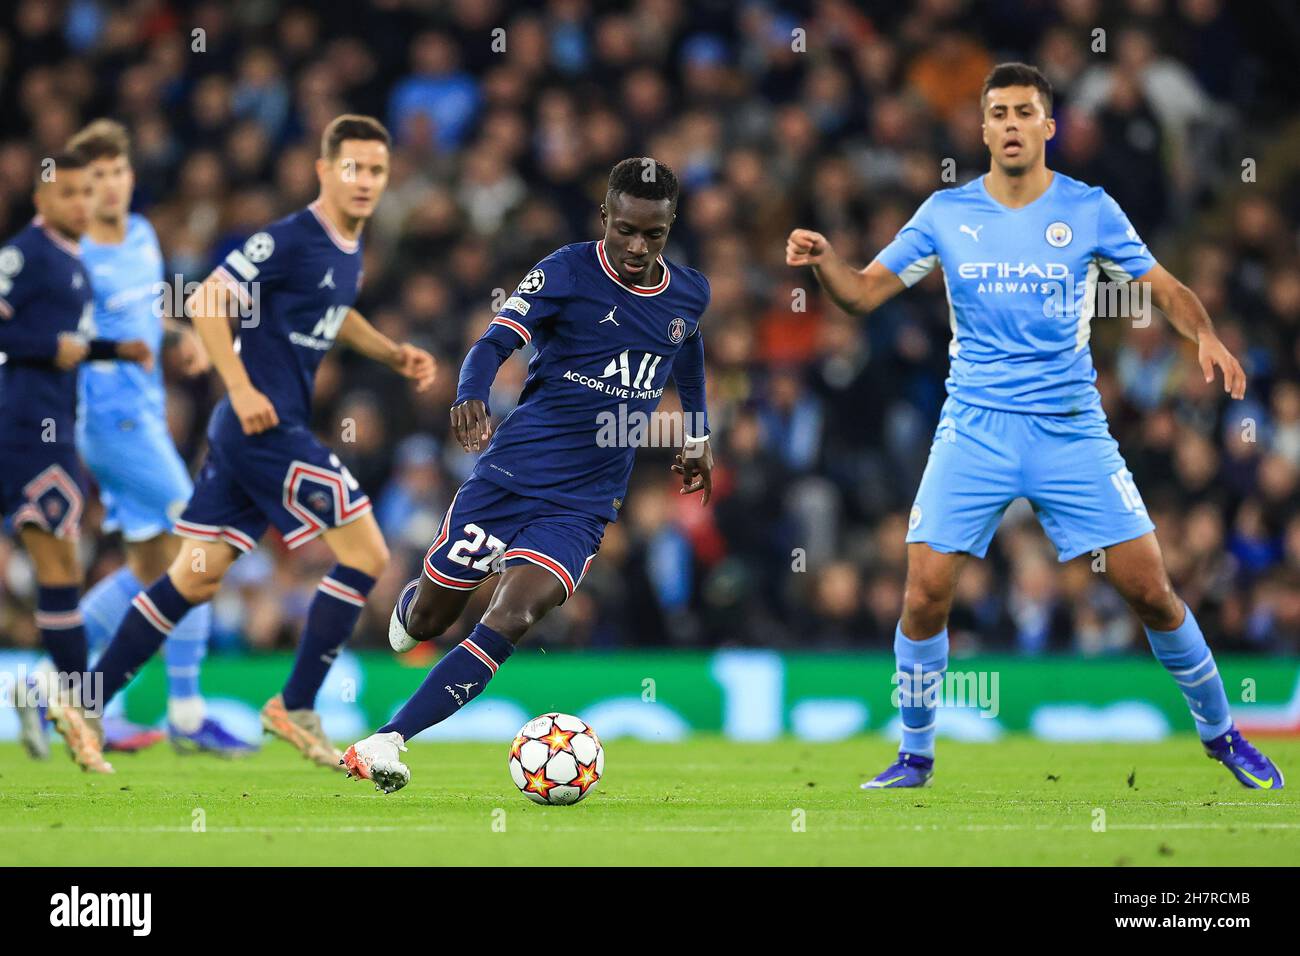 Idrissa Gueye #27 of Paris Saint-Germain in action during the game in, on 11/24/2021. (Photo by Mark Cosgrove/News Images/Sipa USA) Credit: Sipa USA/Alamy Live News Stock Photo